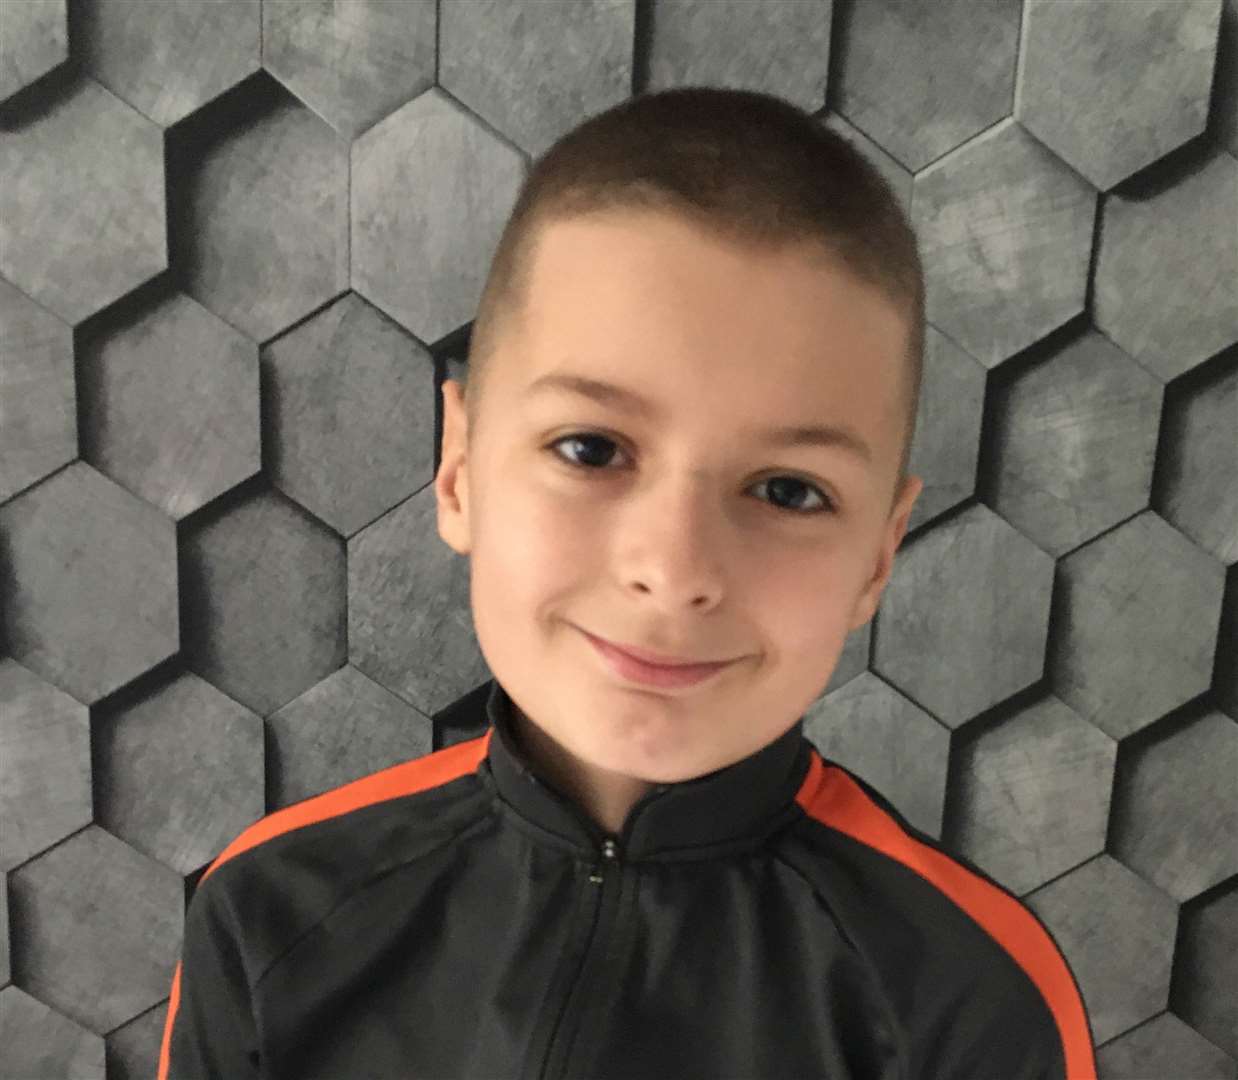 The 10-year-old after braving the shave